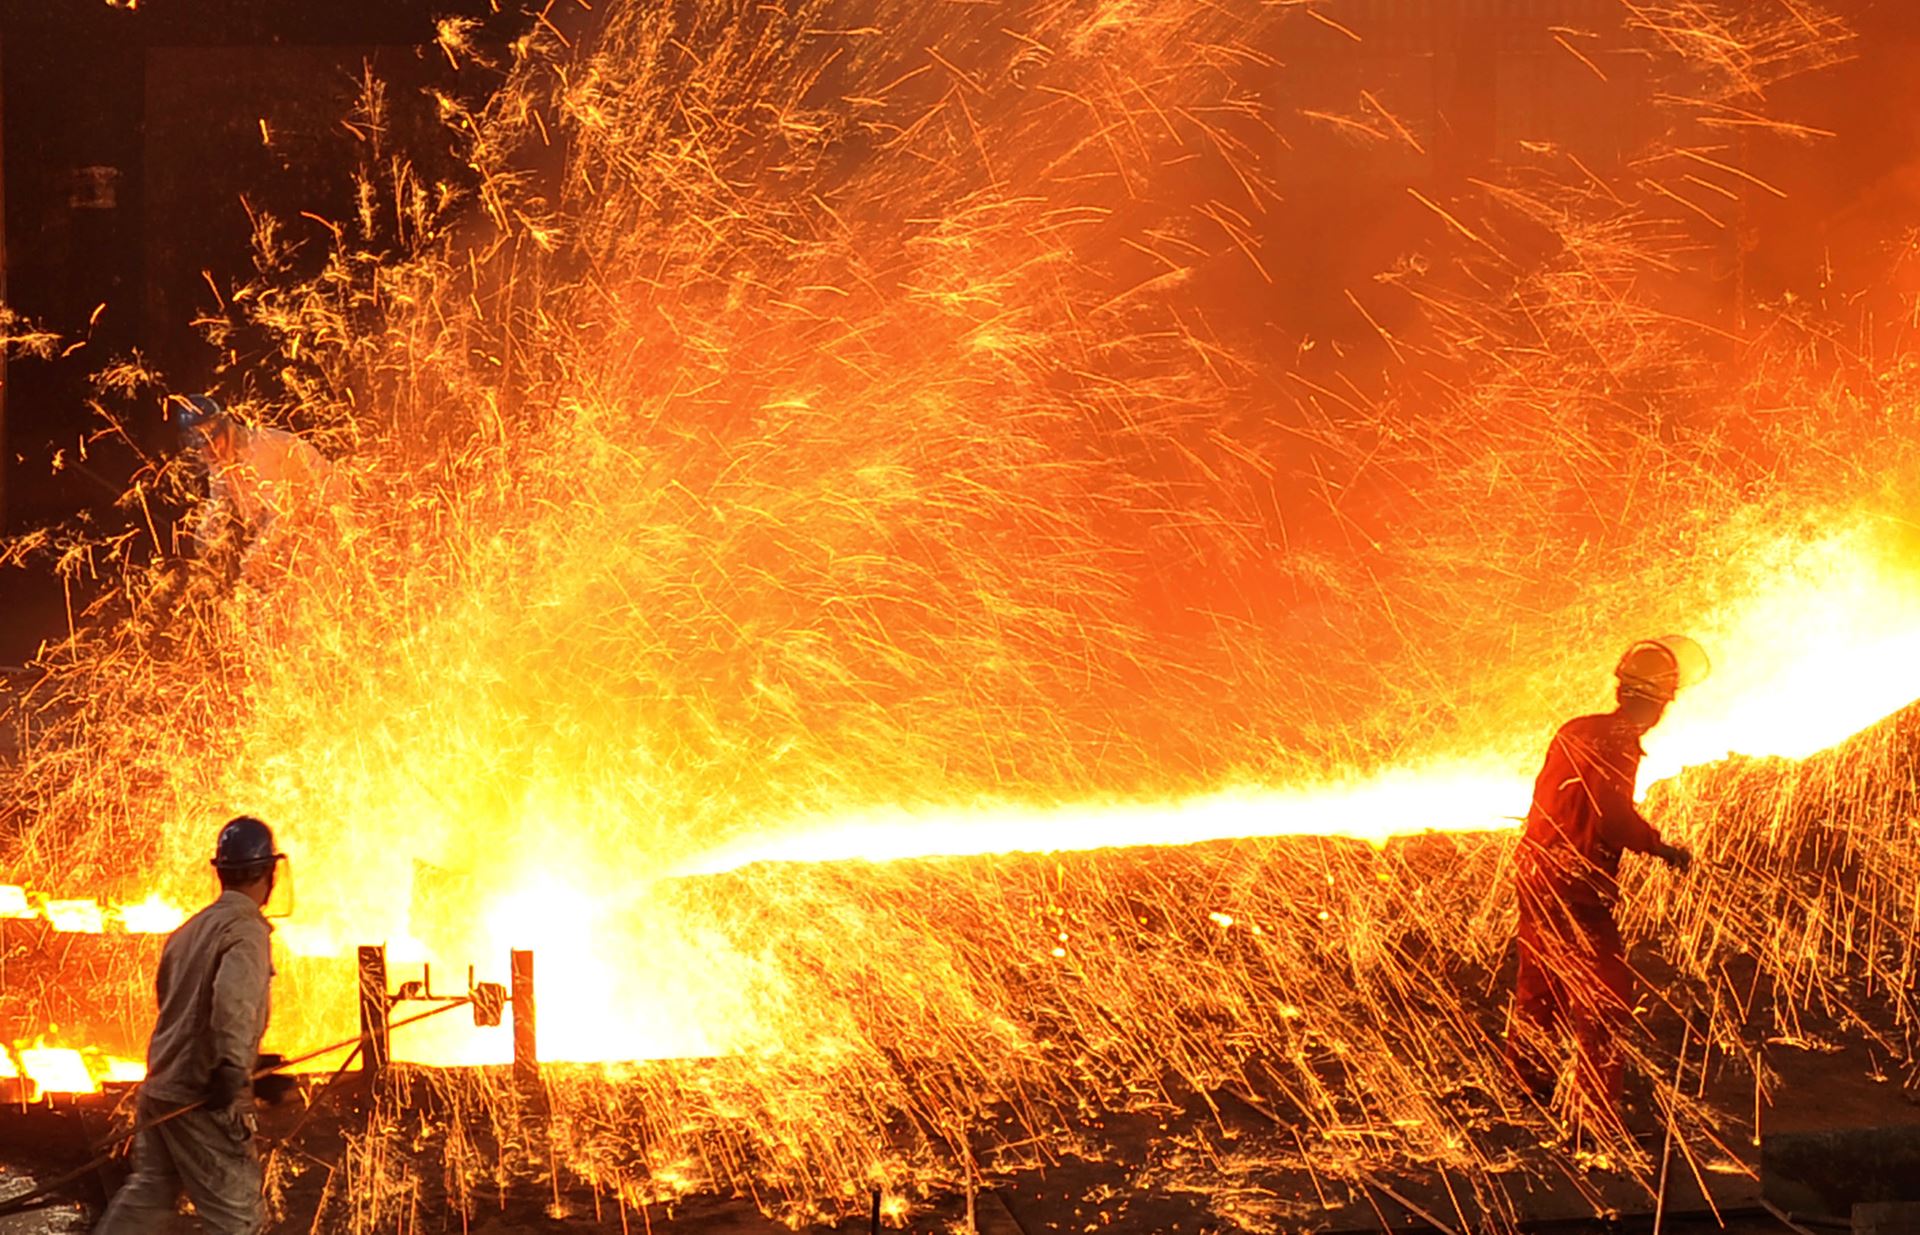 October sees 3.7% drop in China's steel production